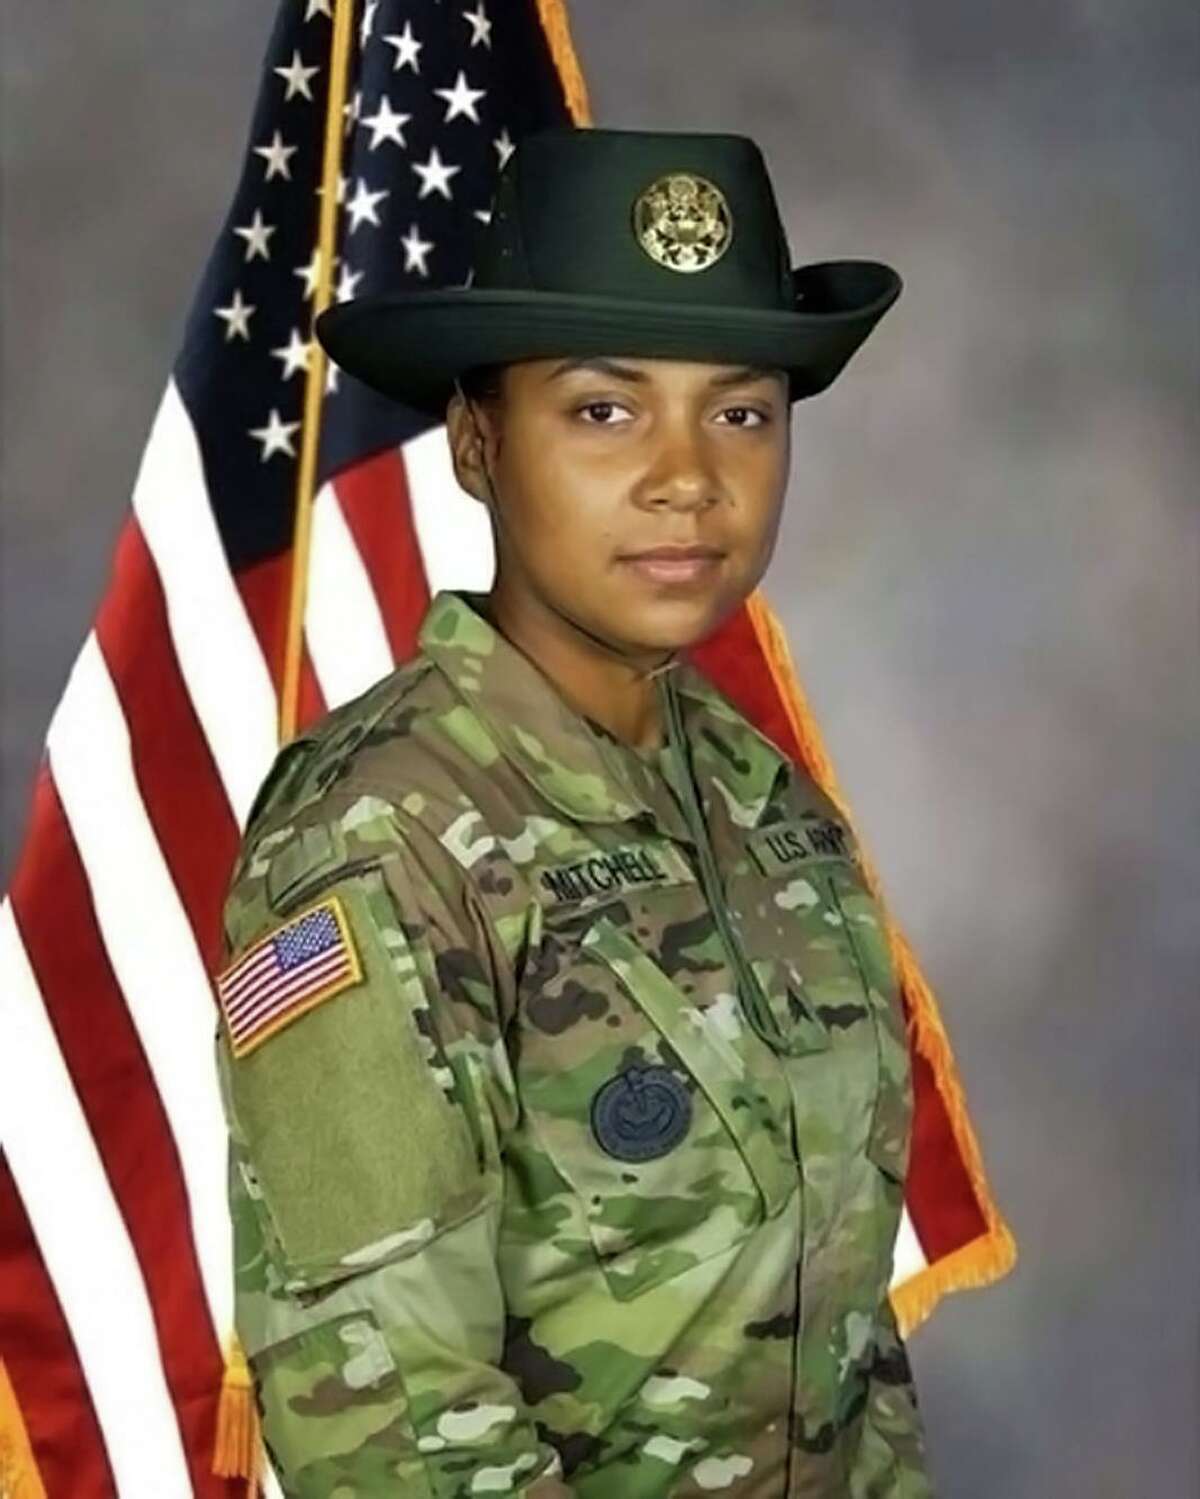 The U.S. Army is offering a $25,000 reward for information leading to the arrest of those involved with the New Year's Day shooting death of a local soldier.